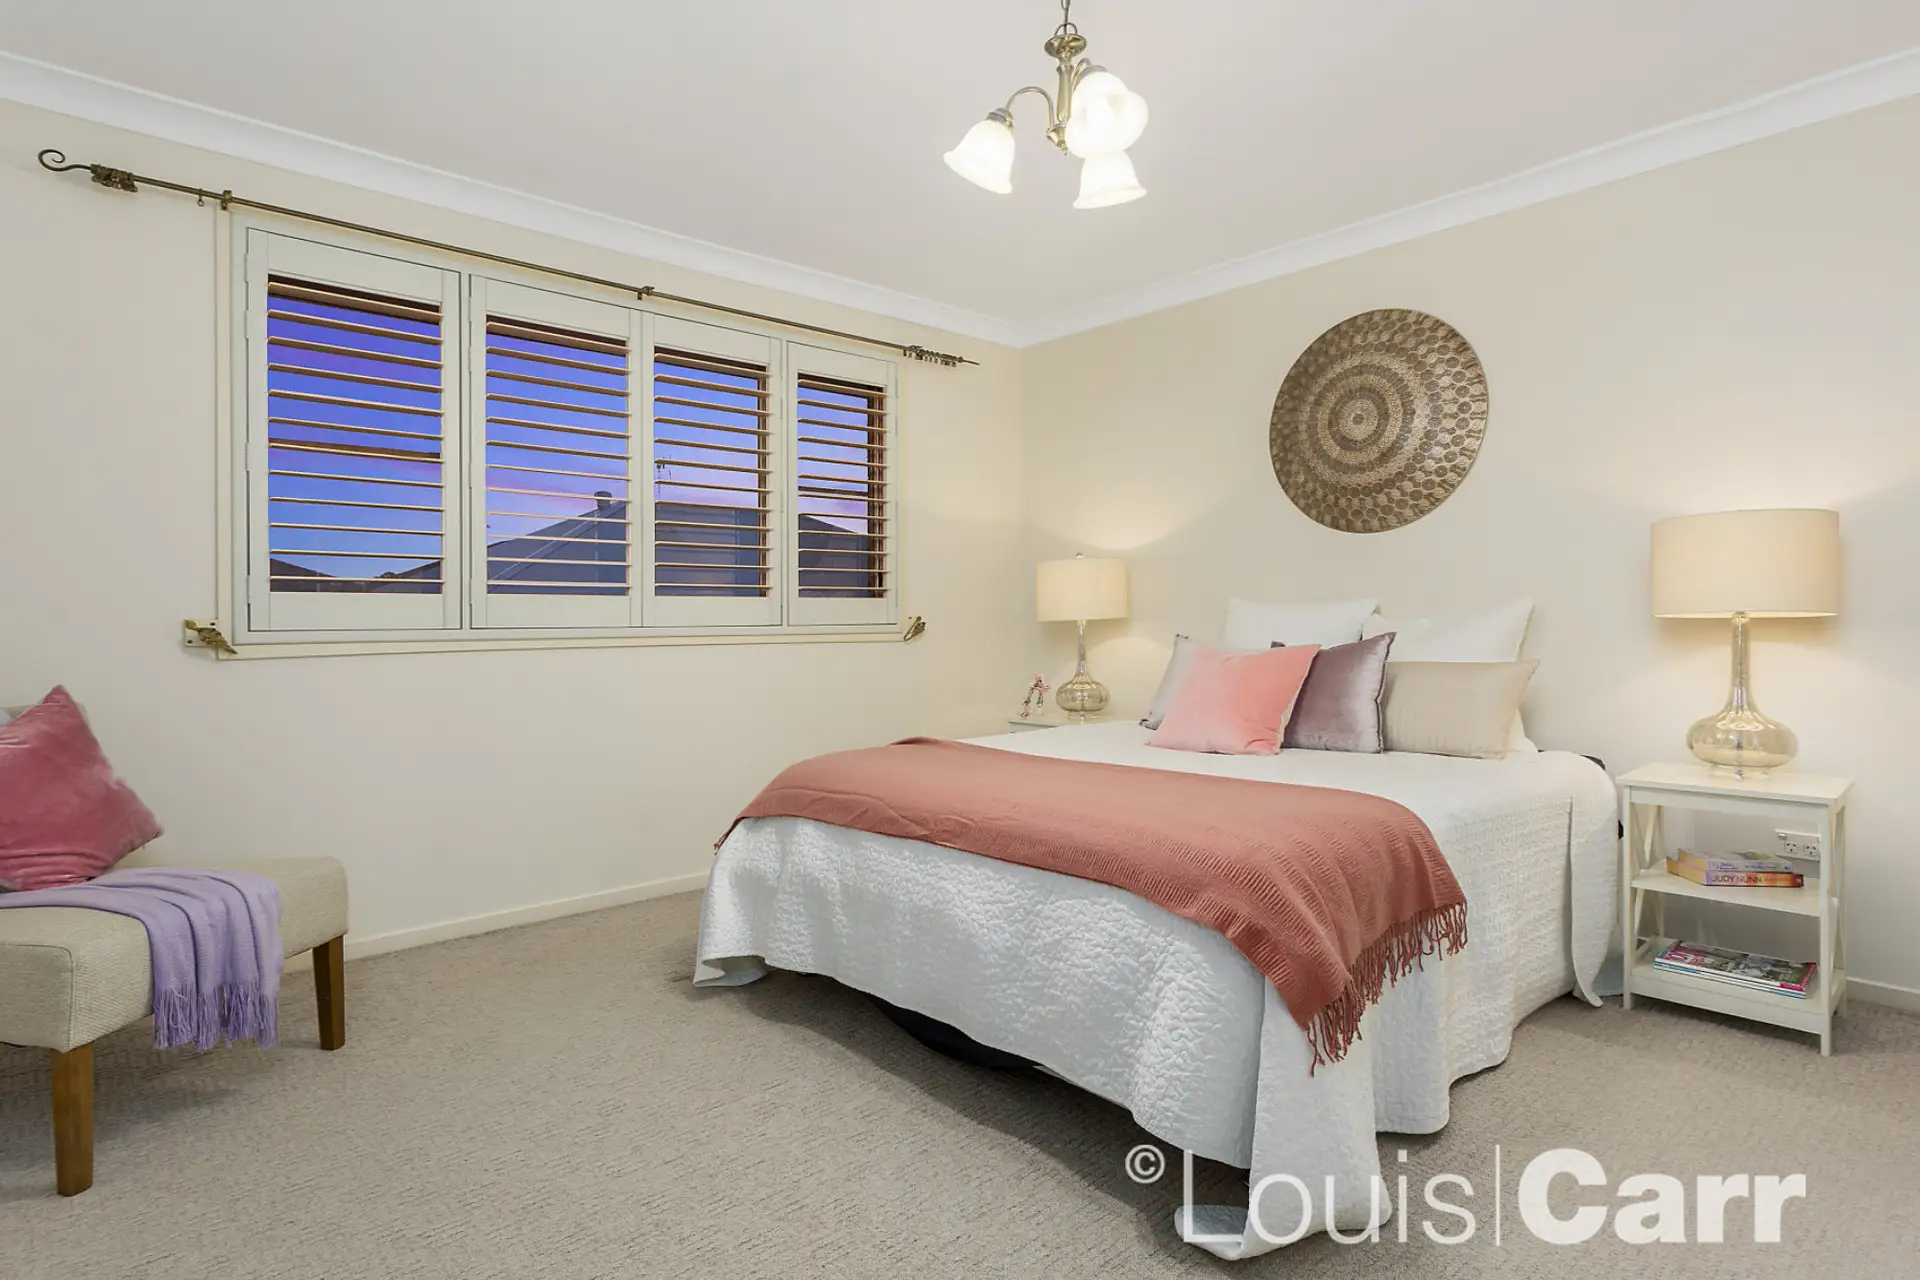 Photo #9: 85 Poole Road, Kellyville - Sold by Louis Carr Real Estate